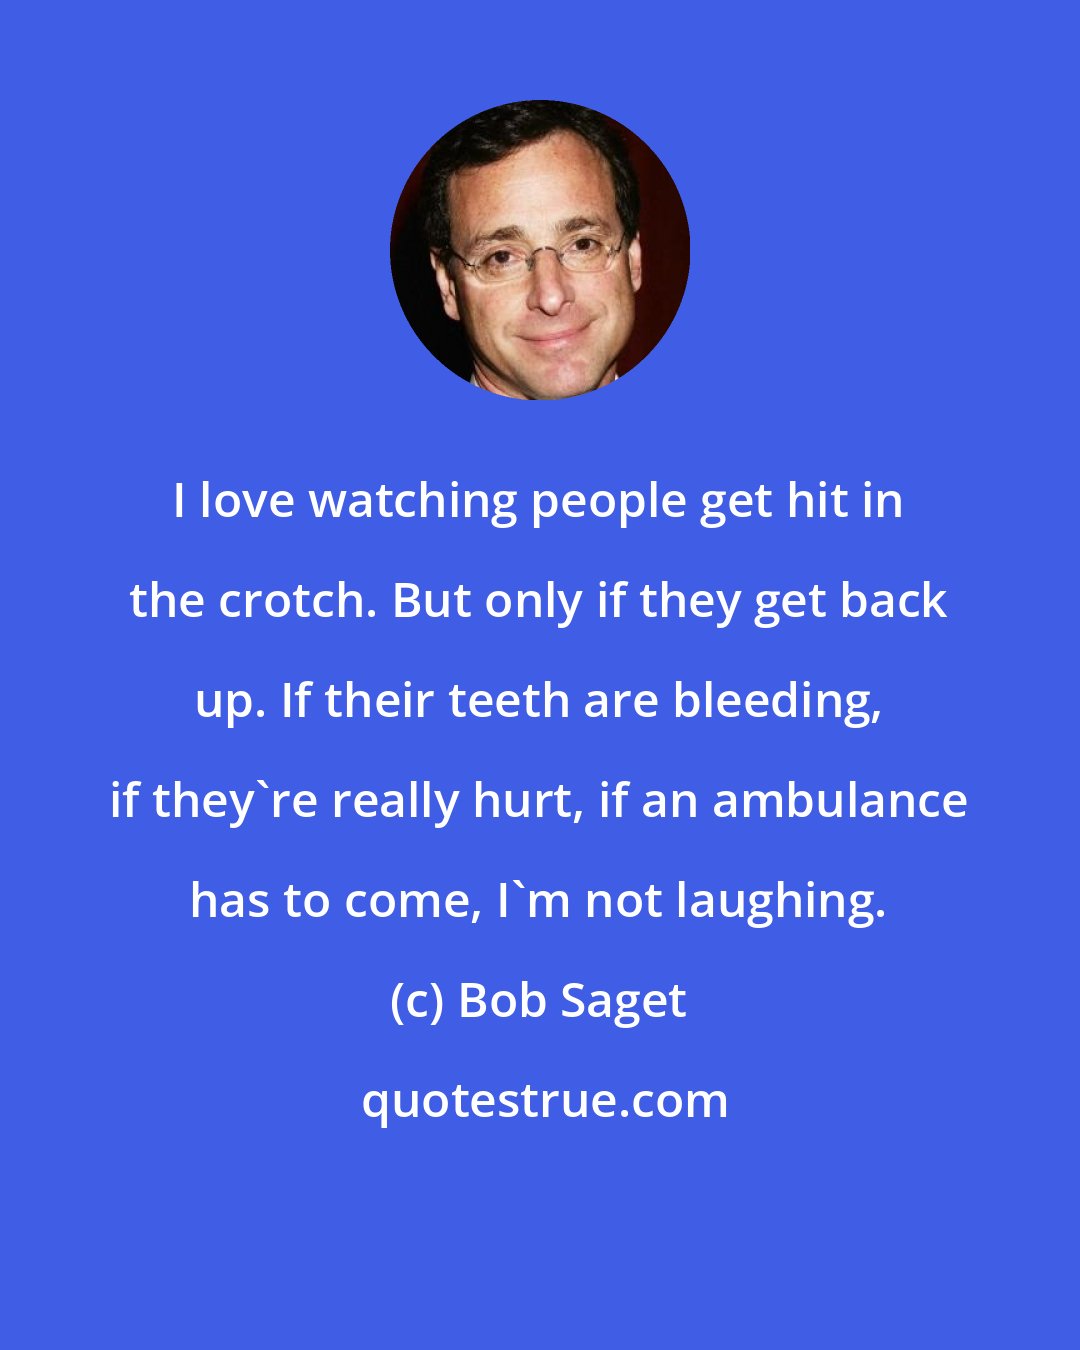 Bob Saget: I love watching people get hit in the crotch. But only if they get back up. If their teeth are bleeding, if they're really hurt, if an ambulance has to come, I'm not laughing.